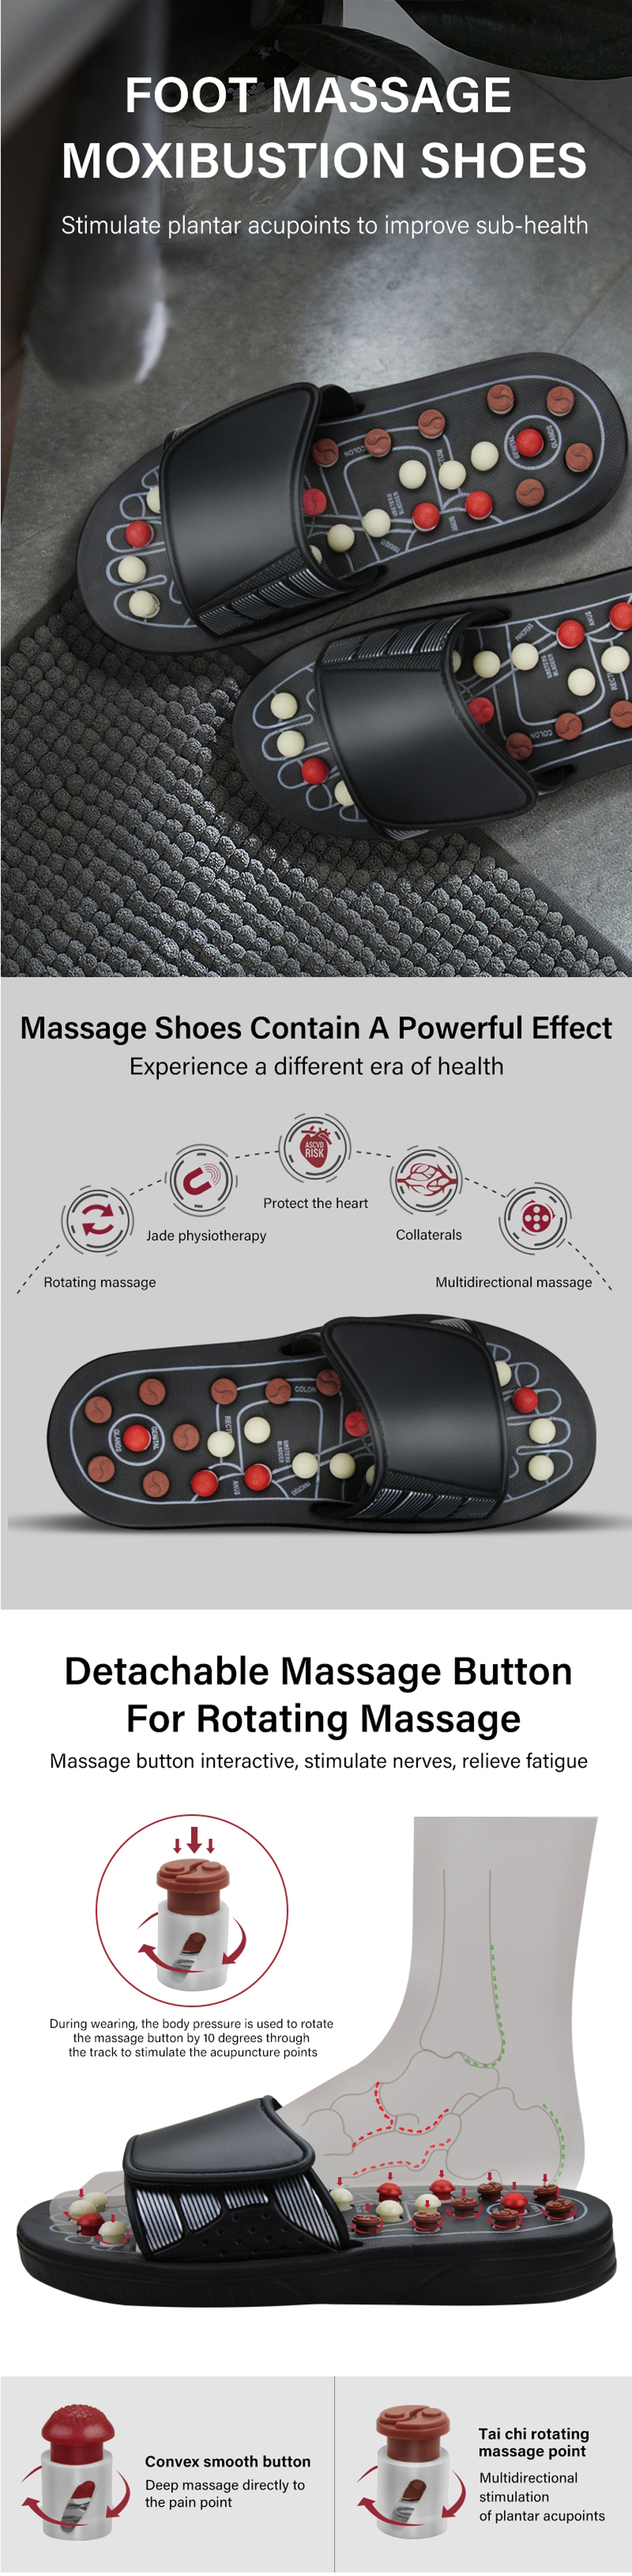 TENGOO-1-Pair-Feet-Massage-Slippers-Foot-Reflexology-Acupuncture-Therapy-Massager-Walk-Stone-Shoes-A-1923900-1